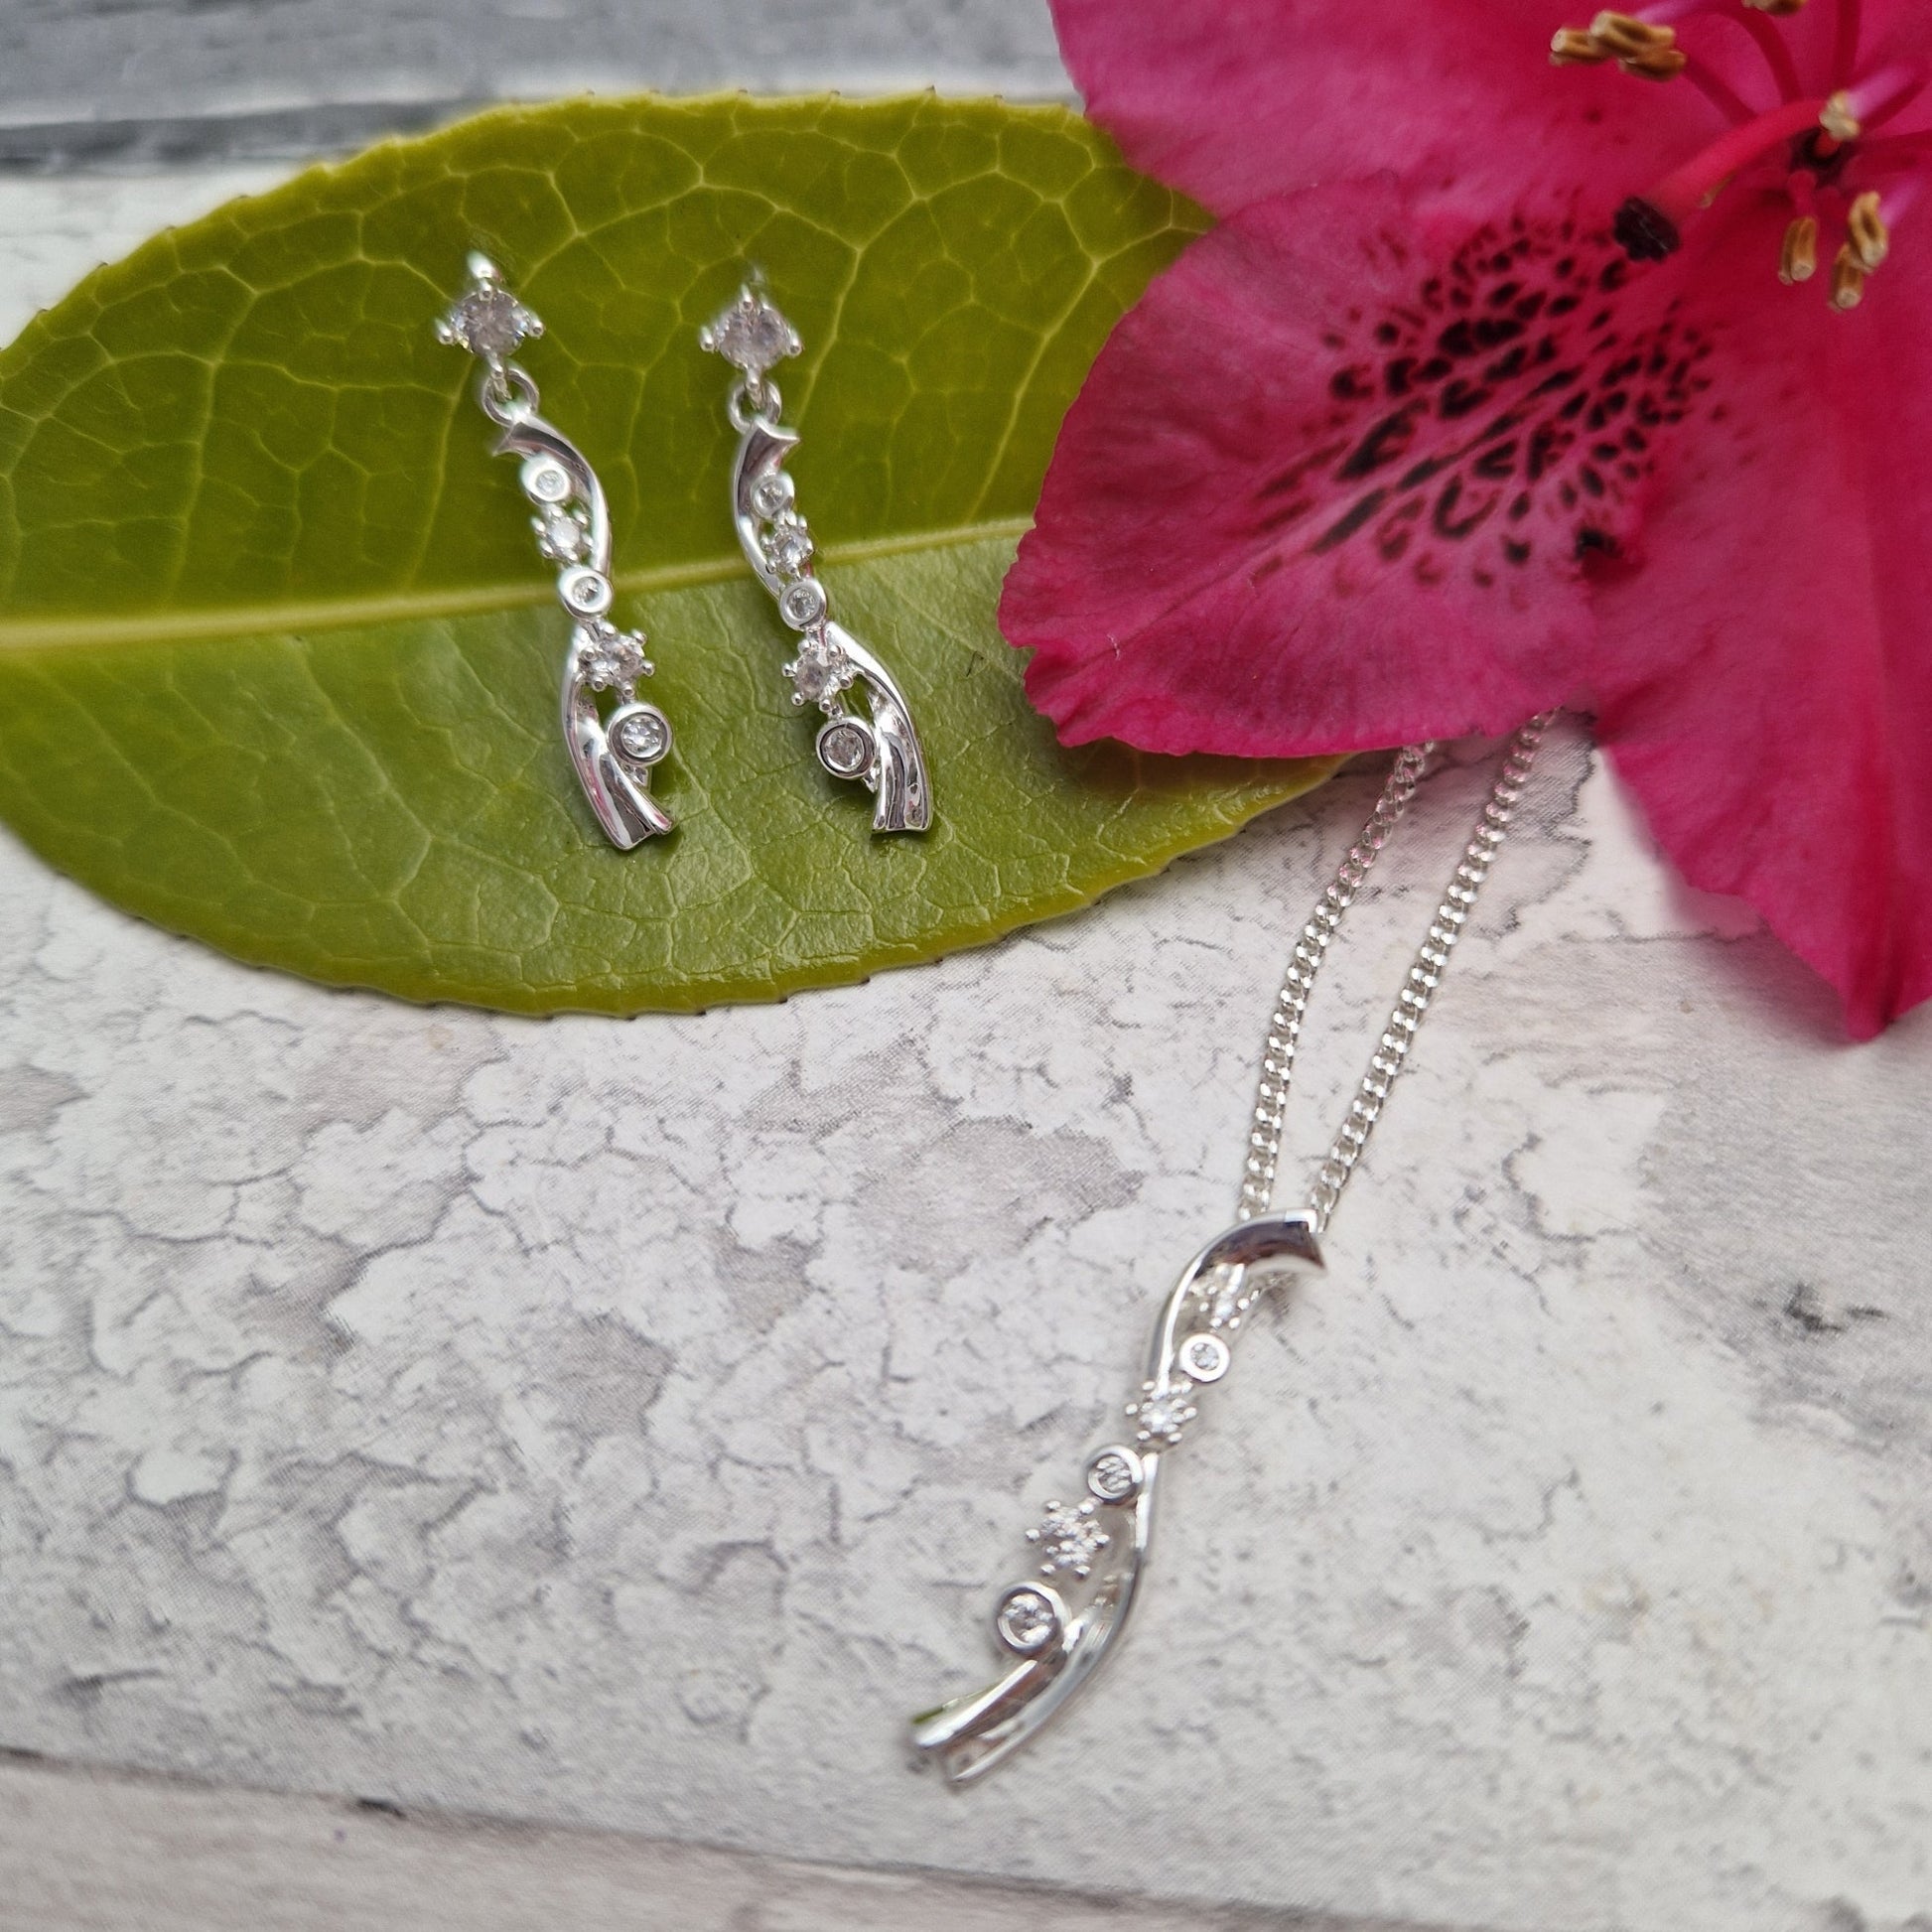 Silver plated necklace and earrings with a rippling sparkle pendant decorated with diamante crystals.